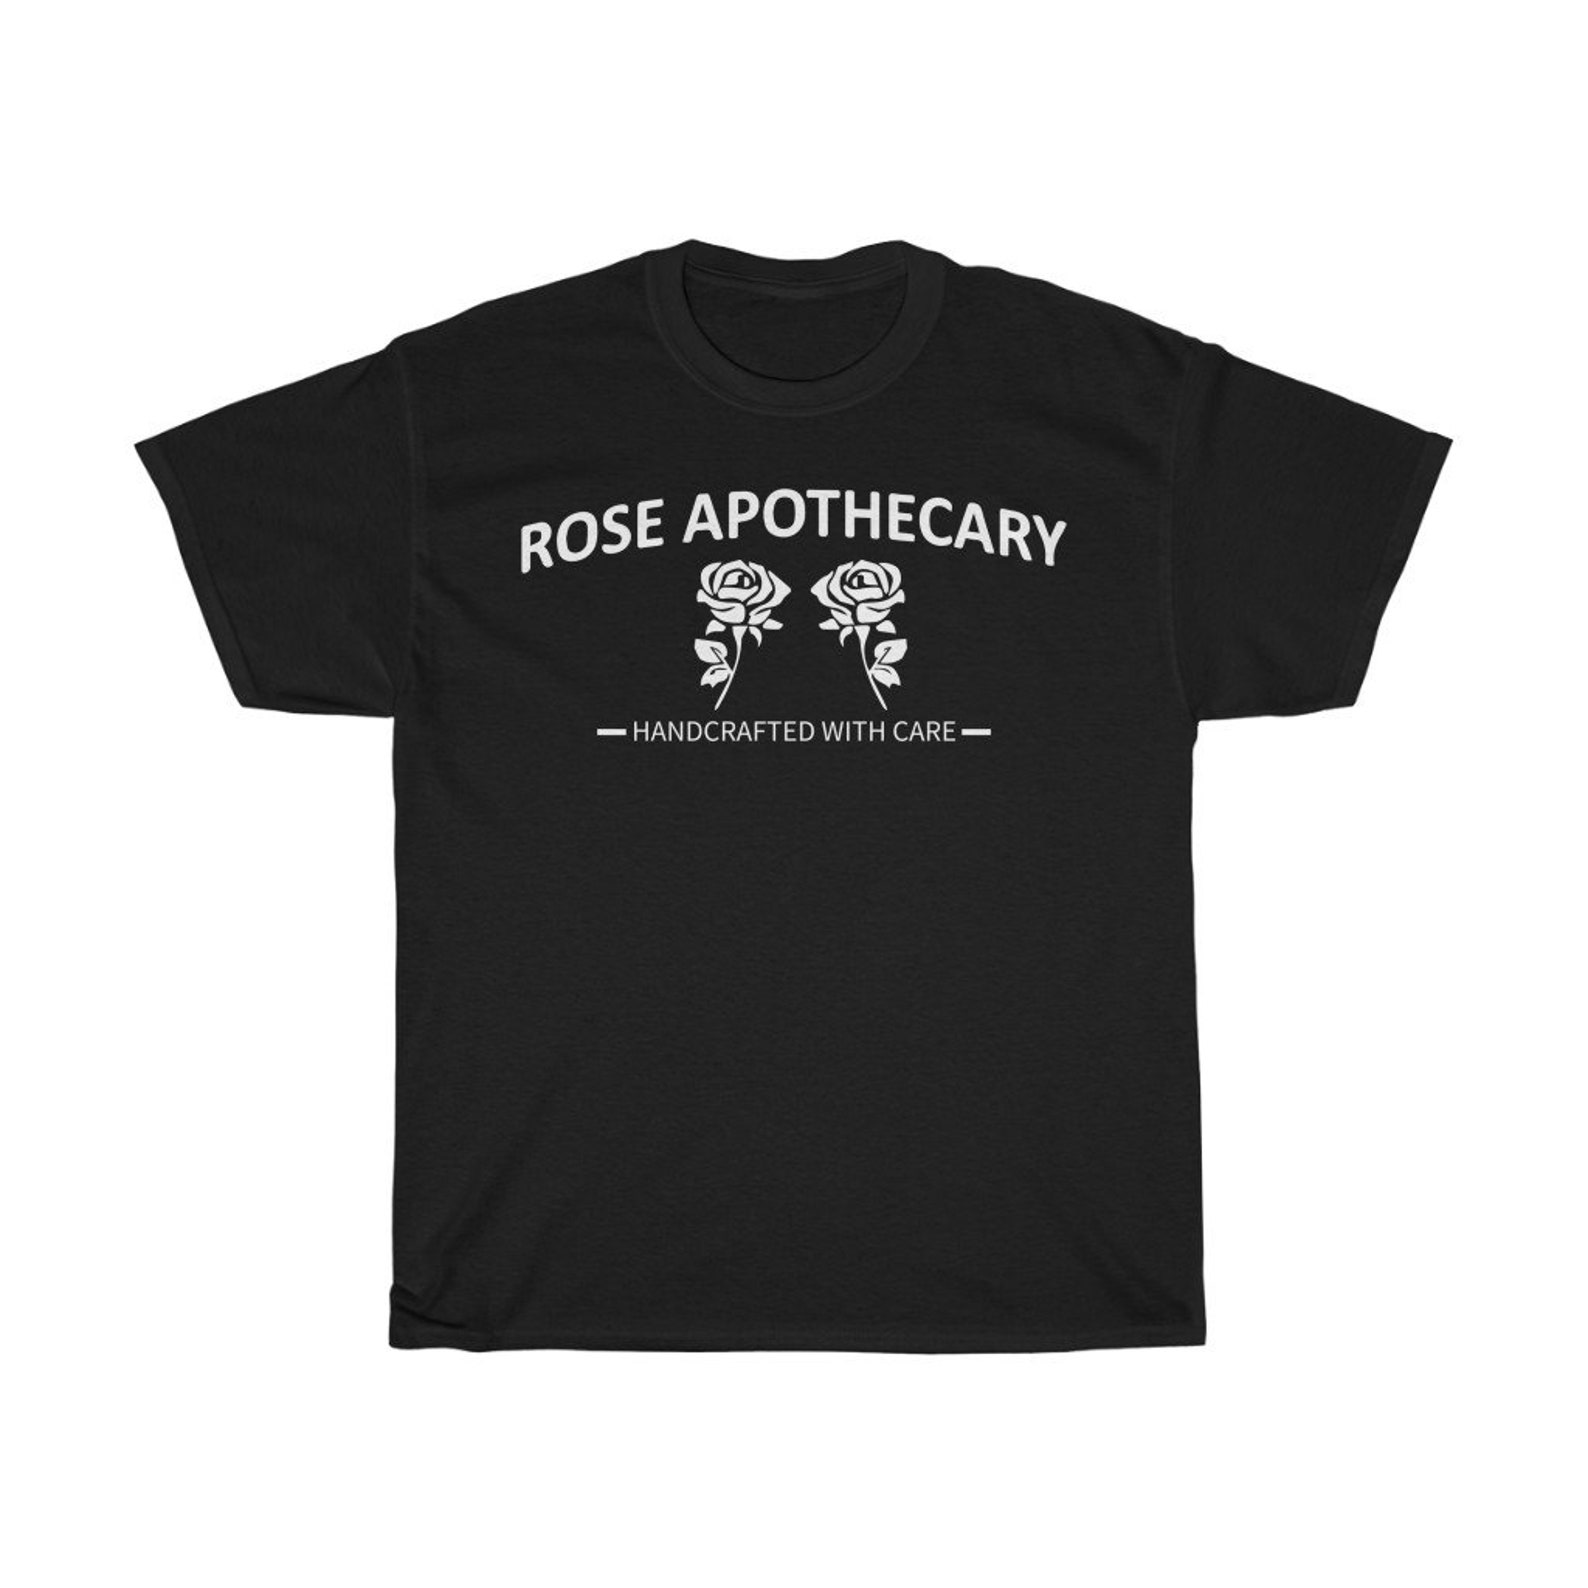 Rose Apothecary T-shirt Funny Tv Show TShirt Gift for | Etsy